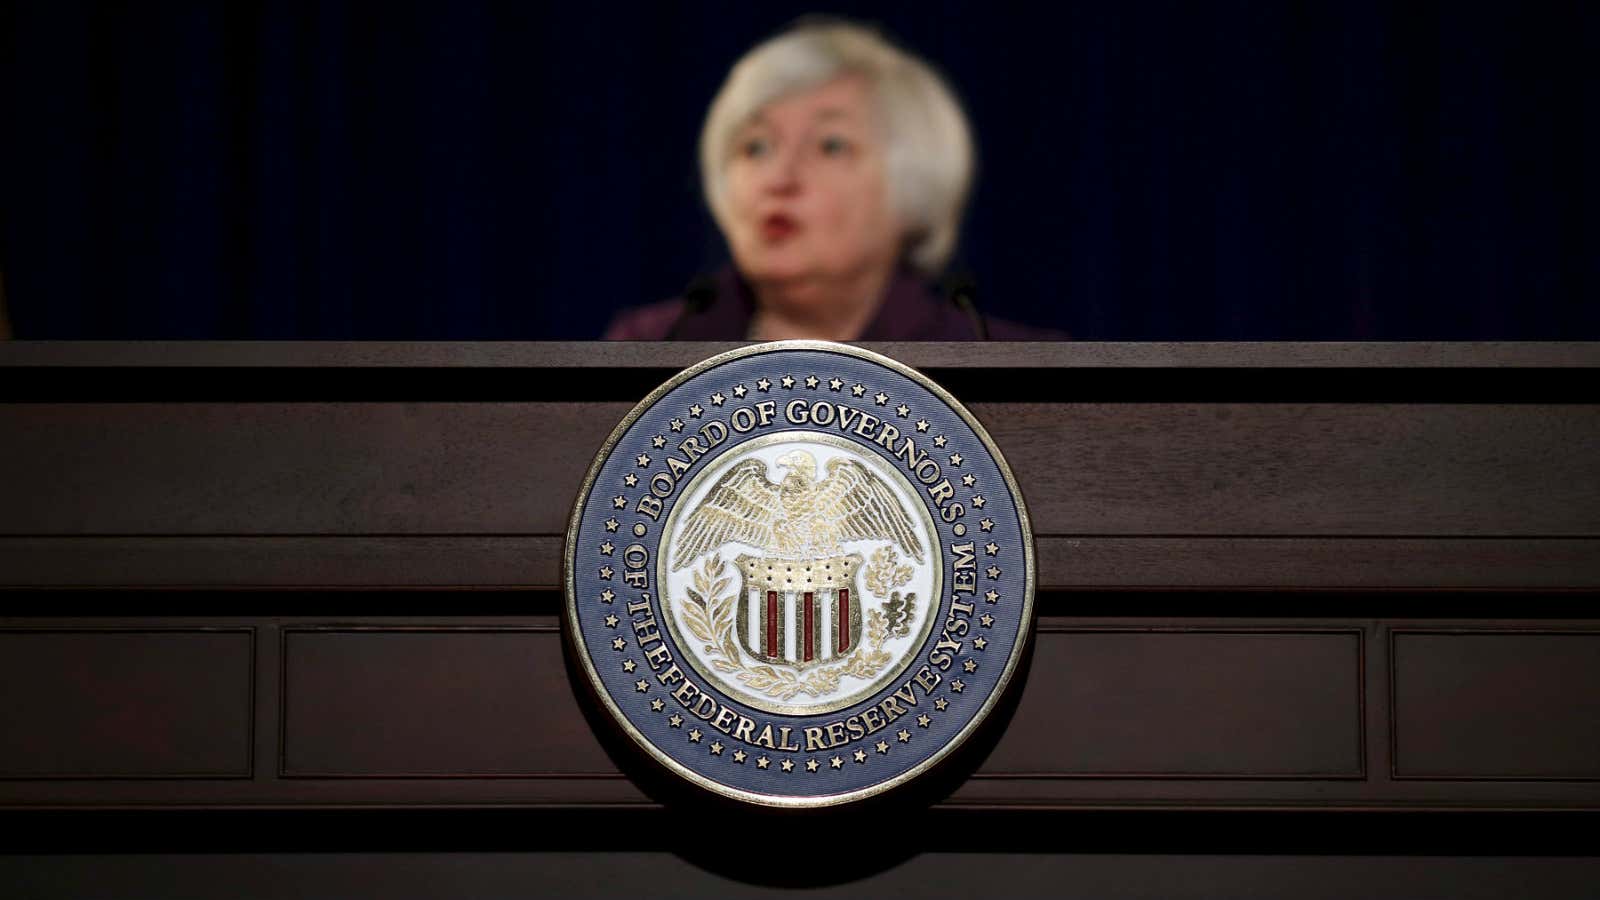 And the Fed Funds rate is…